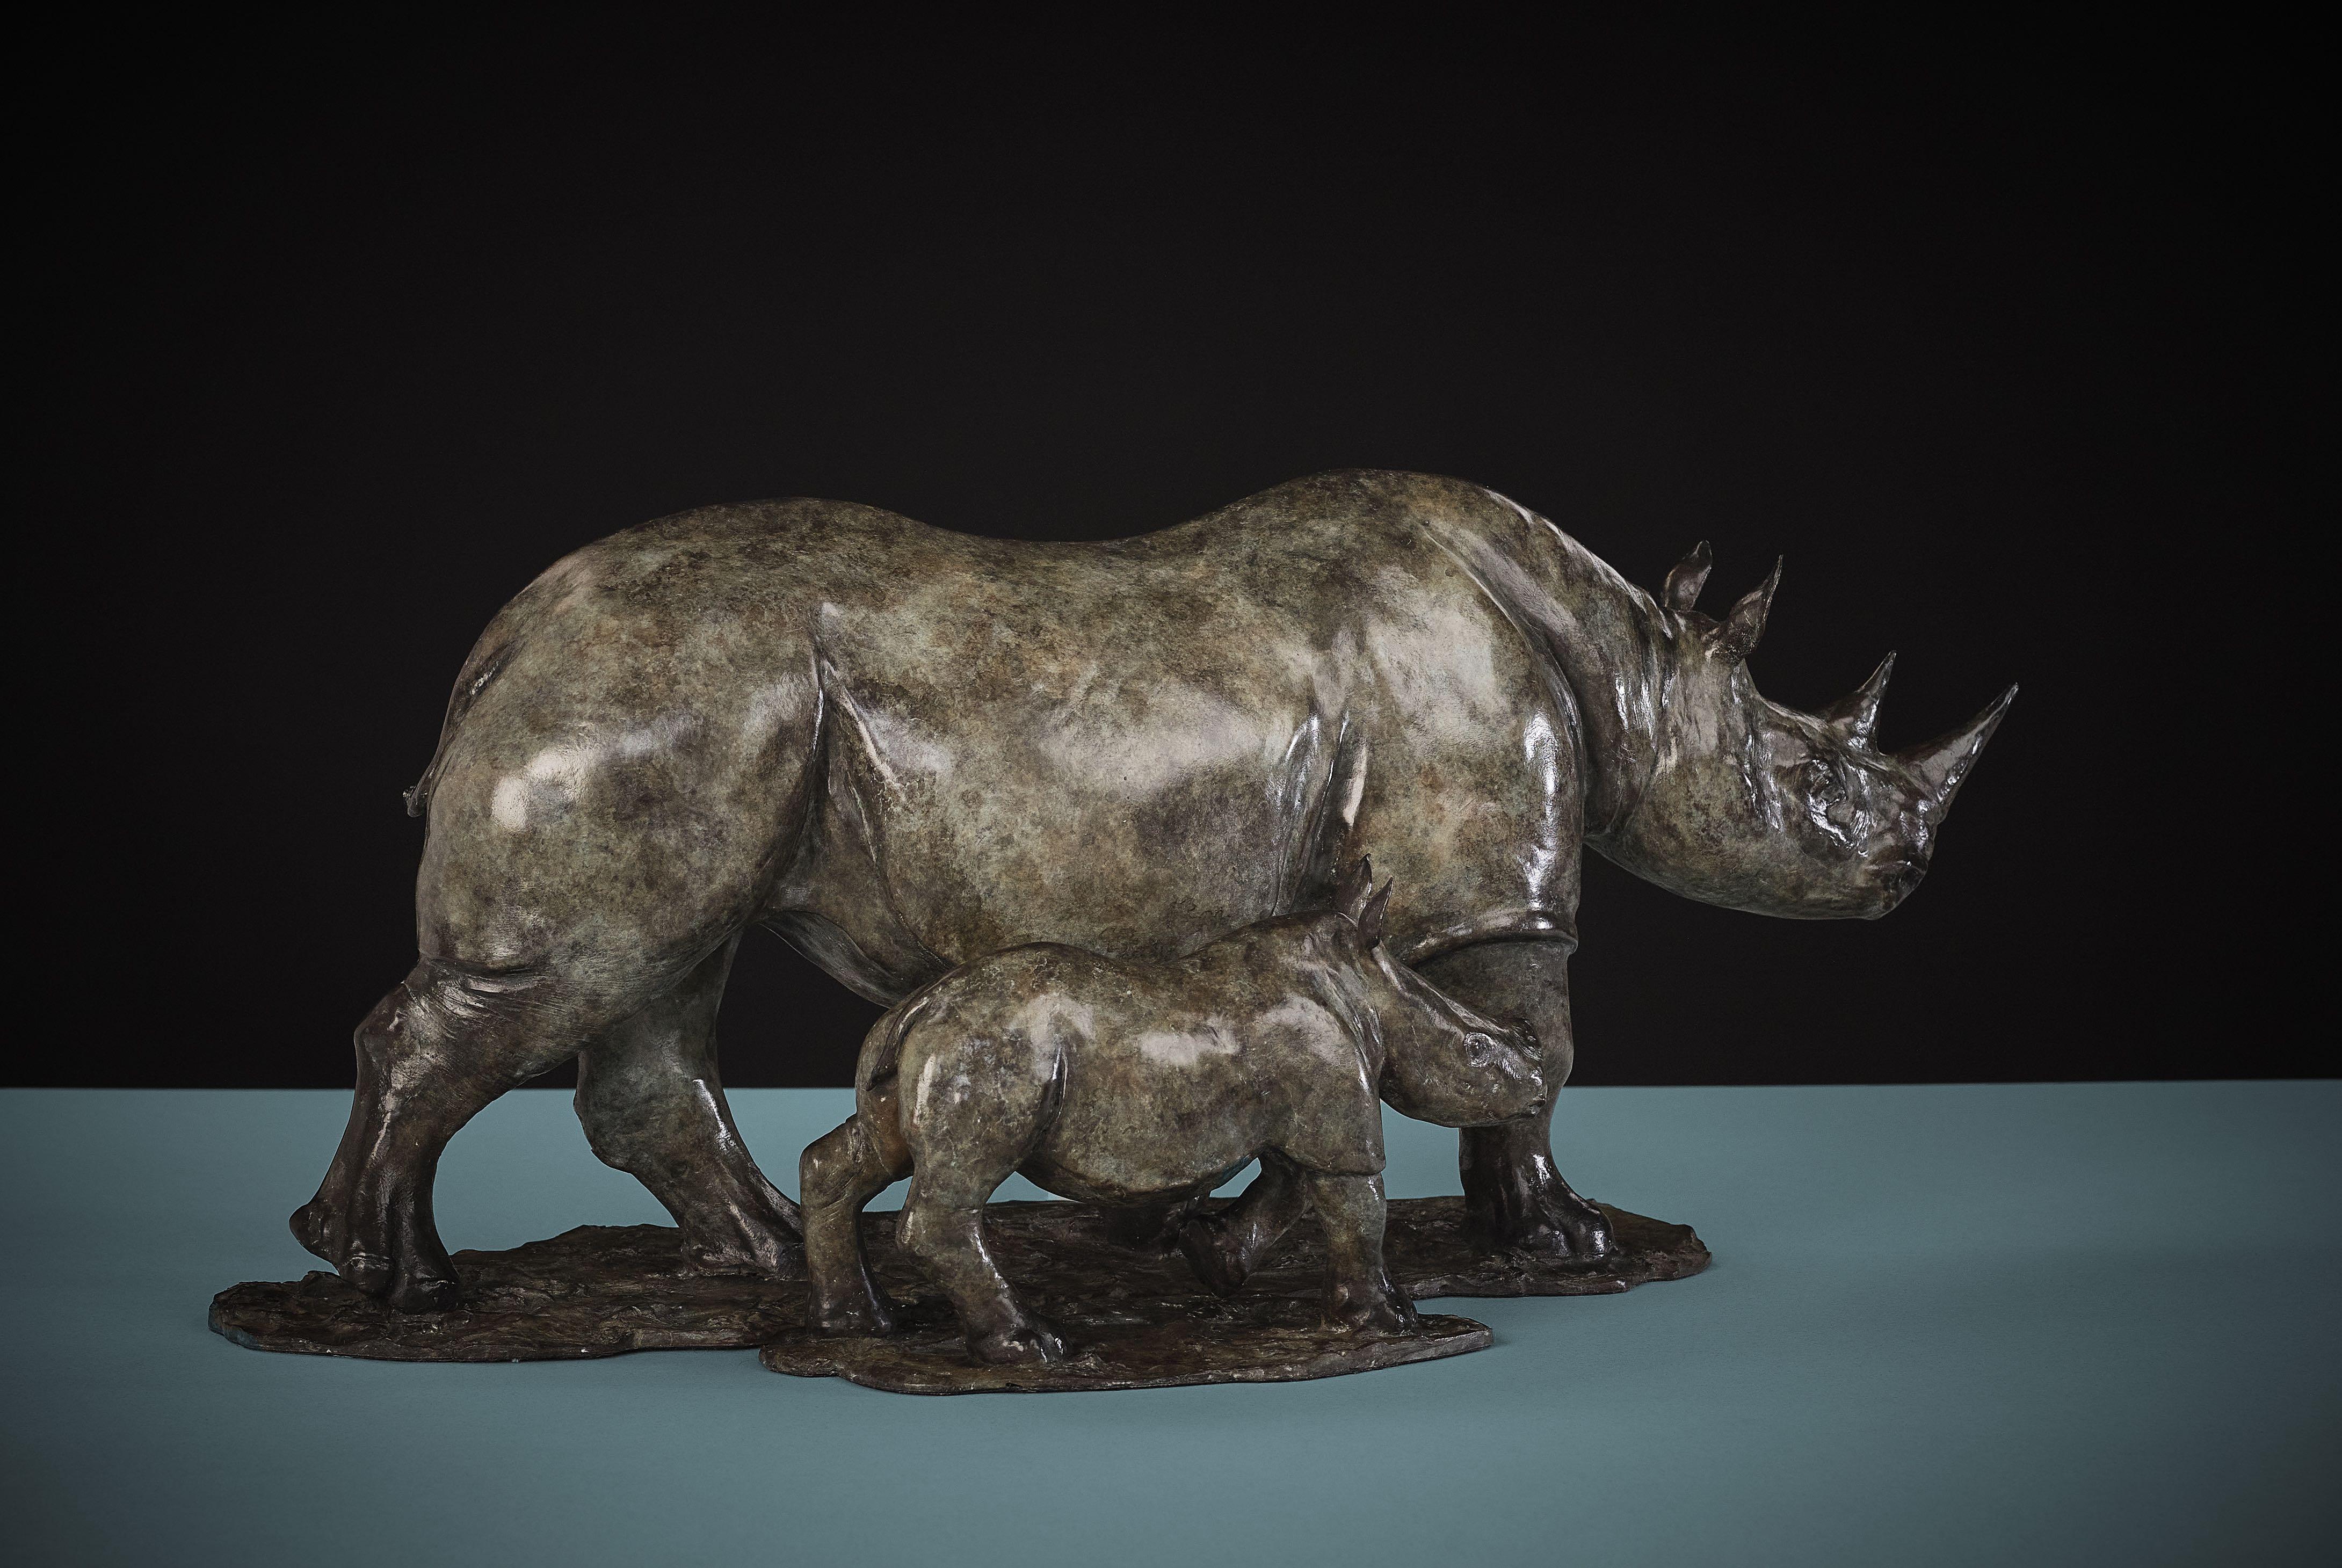 'Rhino and Baby Rhino' by Tobias Martin is a Solid Bronze Animal Sculpture. 

Tobias Martin was born in 1972 in Wiltshire, 12 miles from Stonehenge. Influenced by his idyllic rural upbringing, and the forces of nature and magic that permeated his